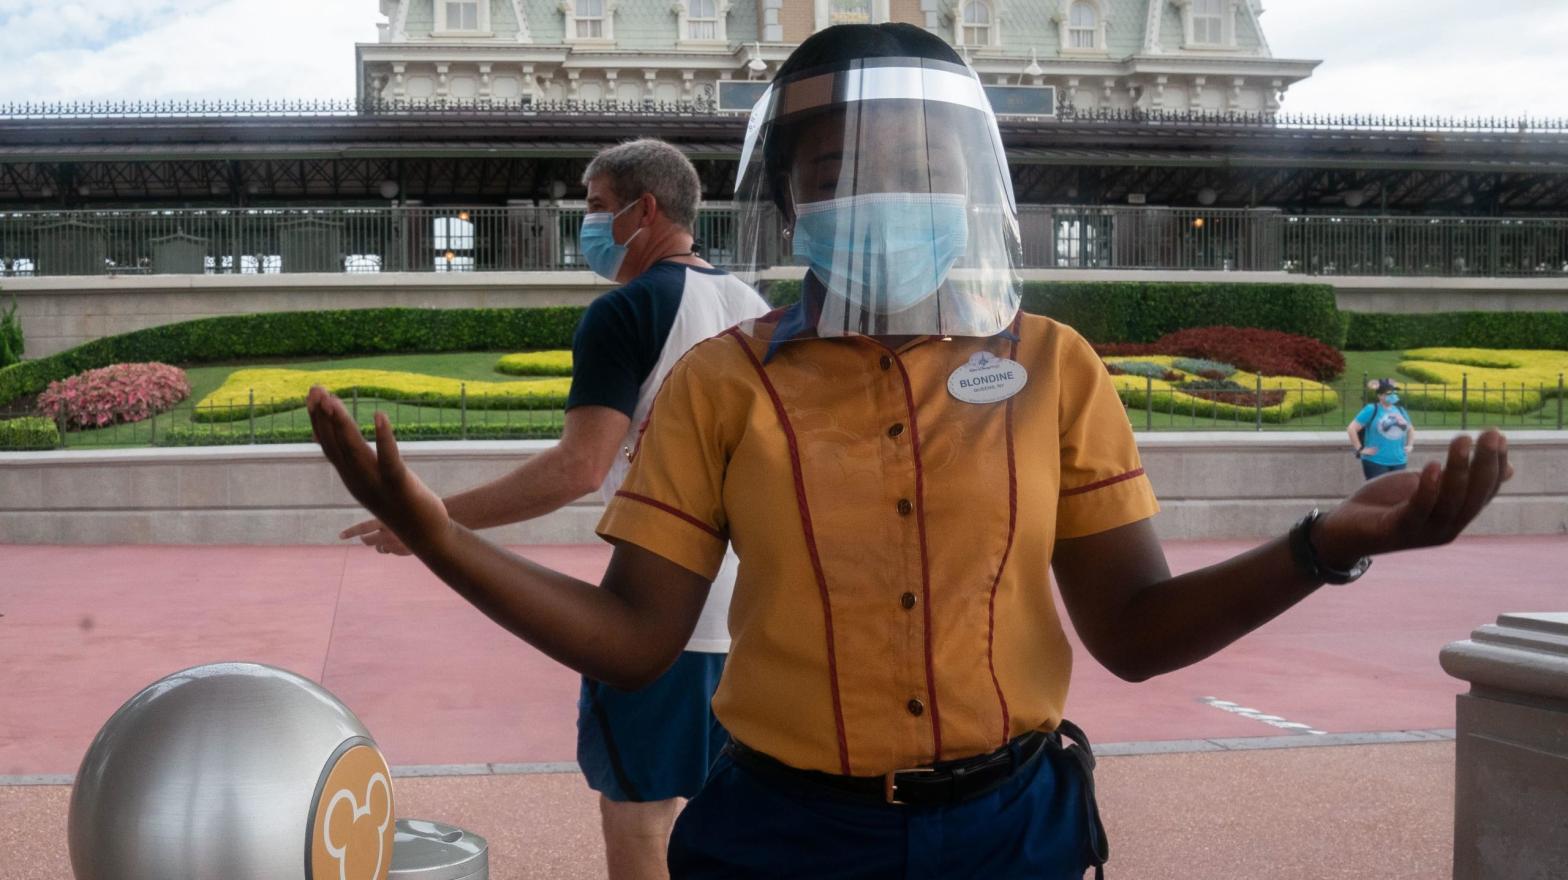 An employee at Walt Disney World Resort's Magic Kingdom wears a facemask and face shield at the entrance to the park during the COVID-19 pandemic in Orlando on July 23, 2020.  (Photo: Bryan Smith, Getty Images)